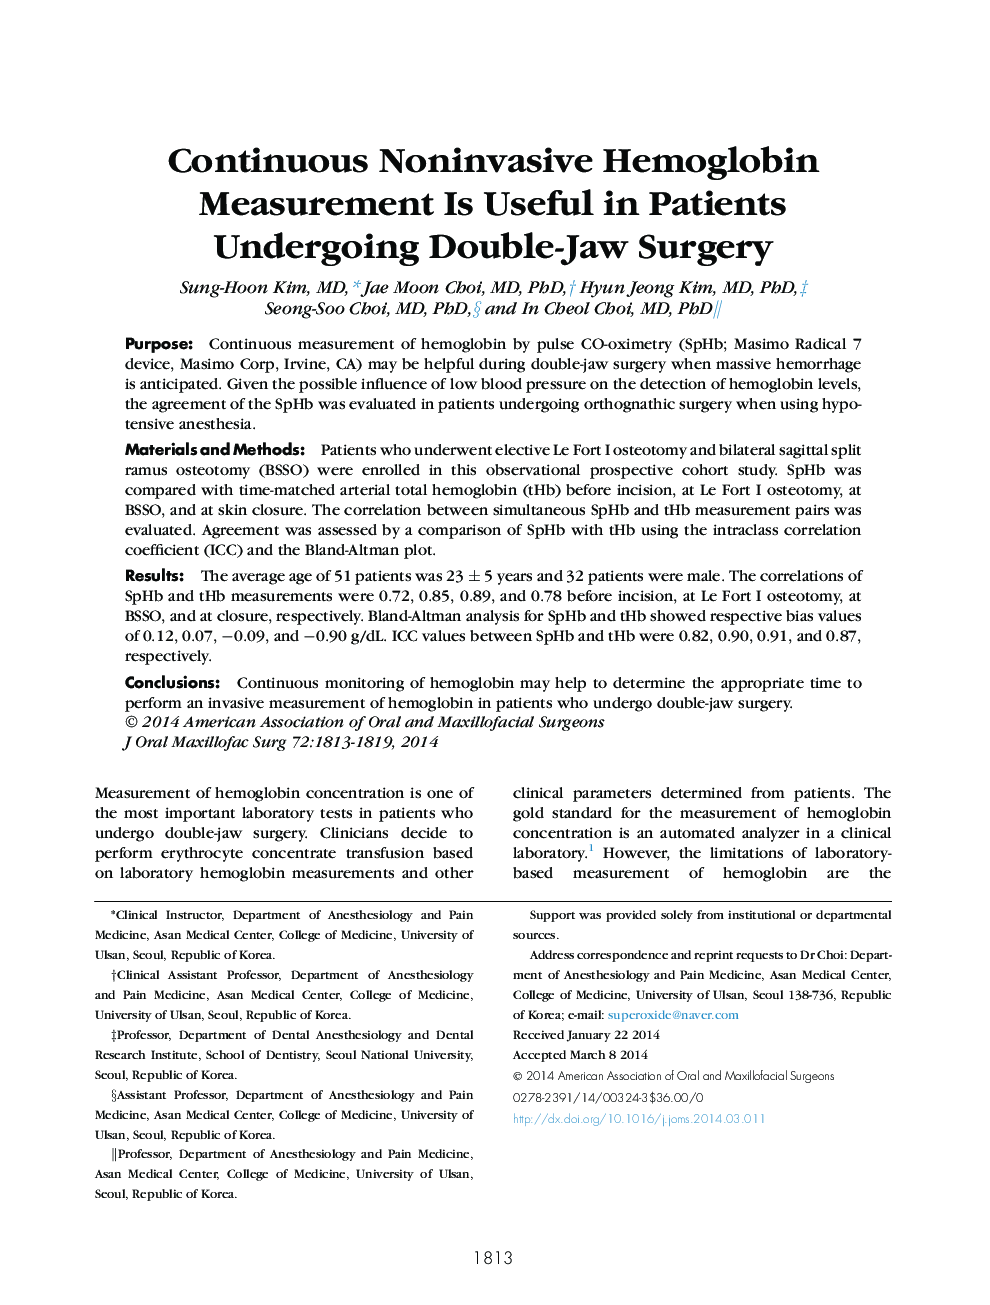 Continuous Noninvasive Hemoglobin Measurement Is Useful in Patients Undergoing Double-Jaw Surgery 